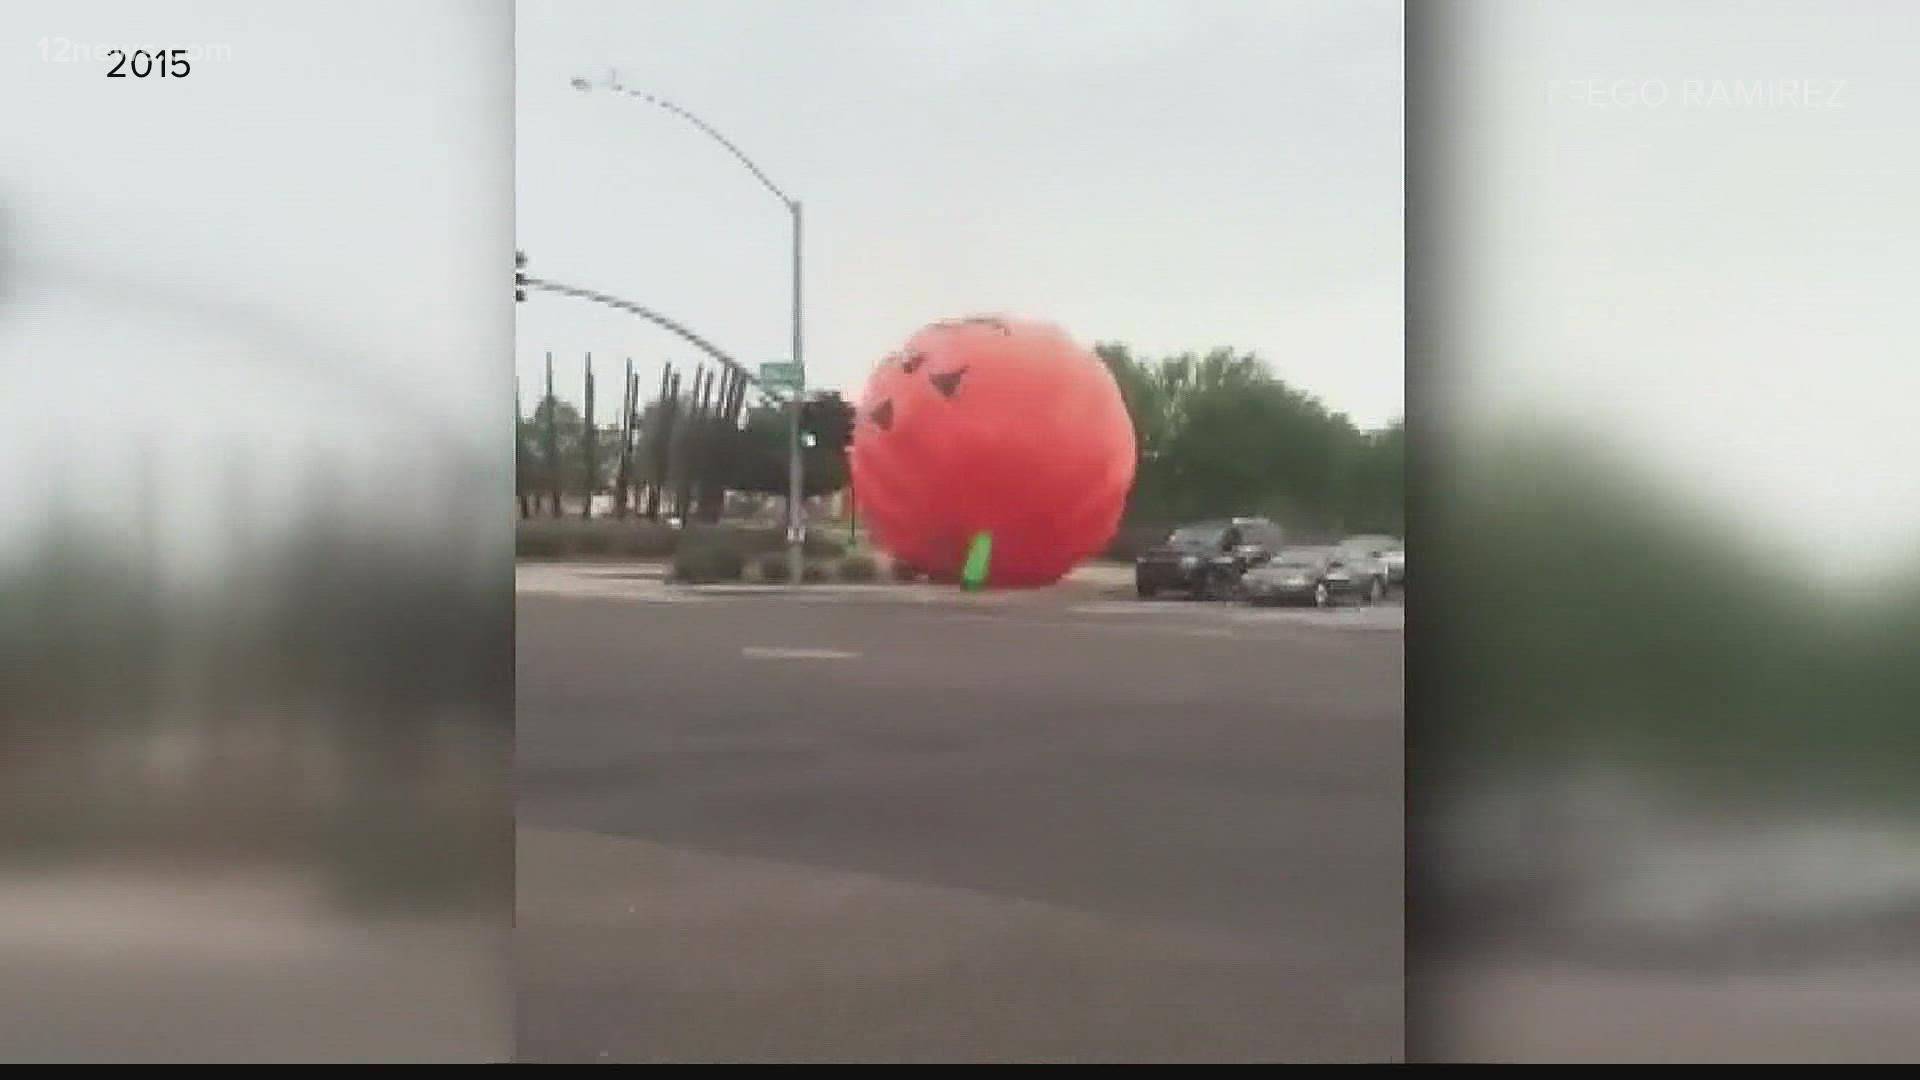 The runaway pumpkin went viral when extreme winds took it for a ride across traffic away from Peoria's Monster Bash.